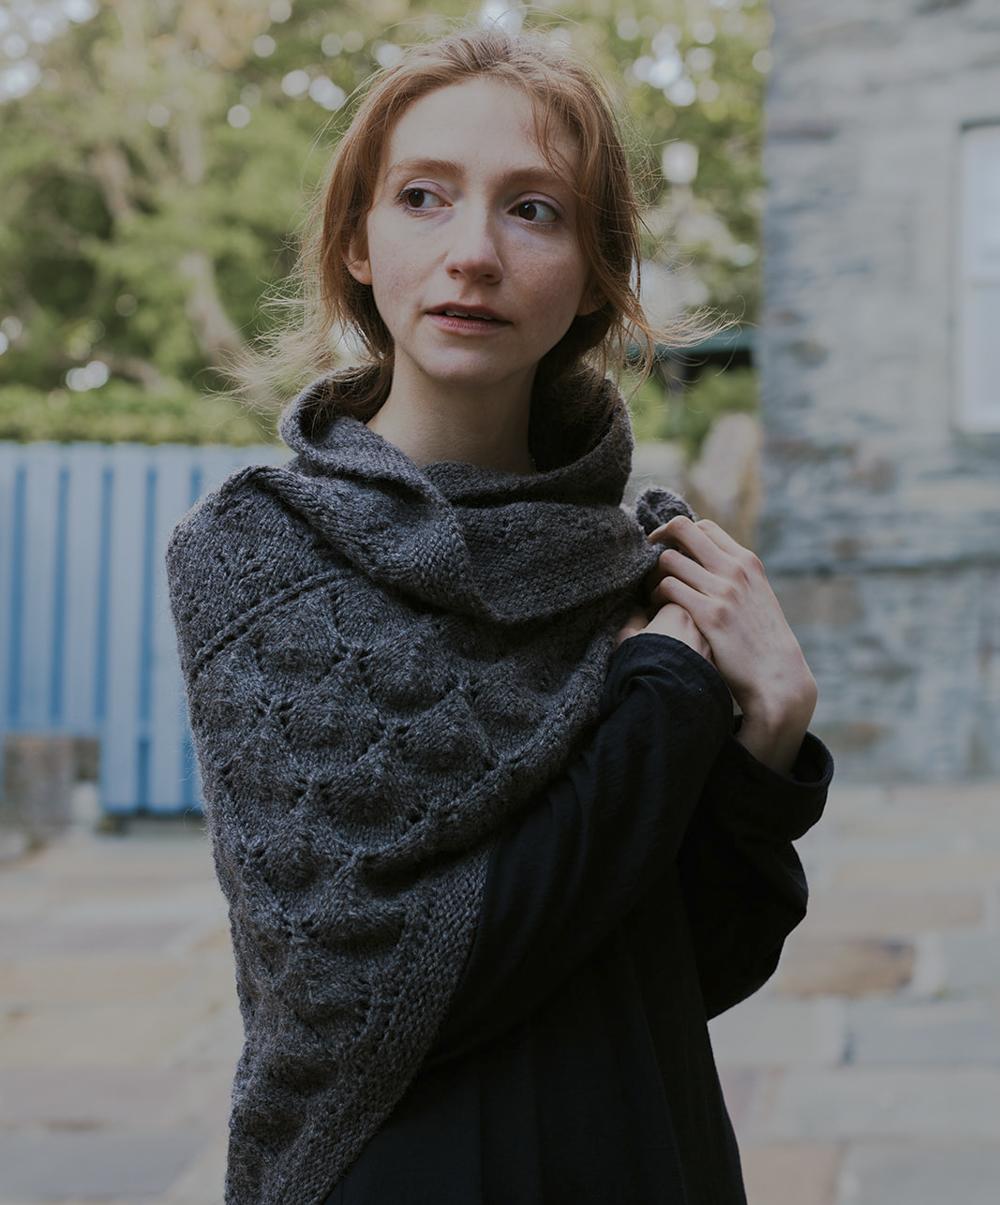 A woman with red hair is all wrapped up in wool, wearing a graphite-coloured deep grey lacy shawl, worked in natural sheepy shades of grey